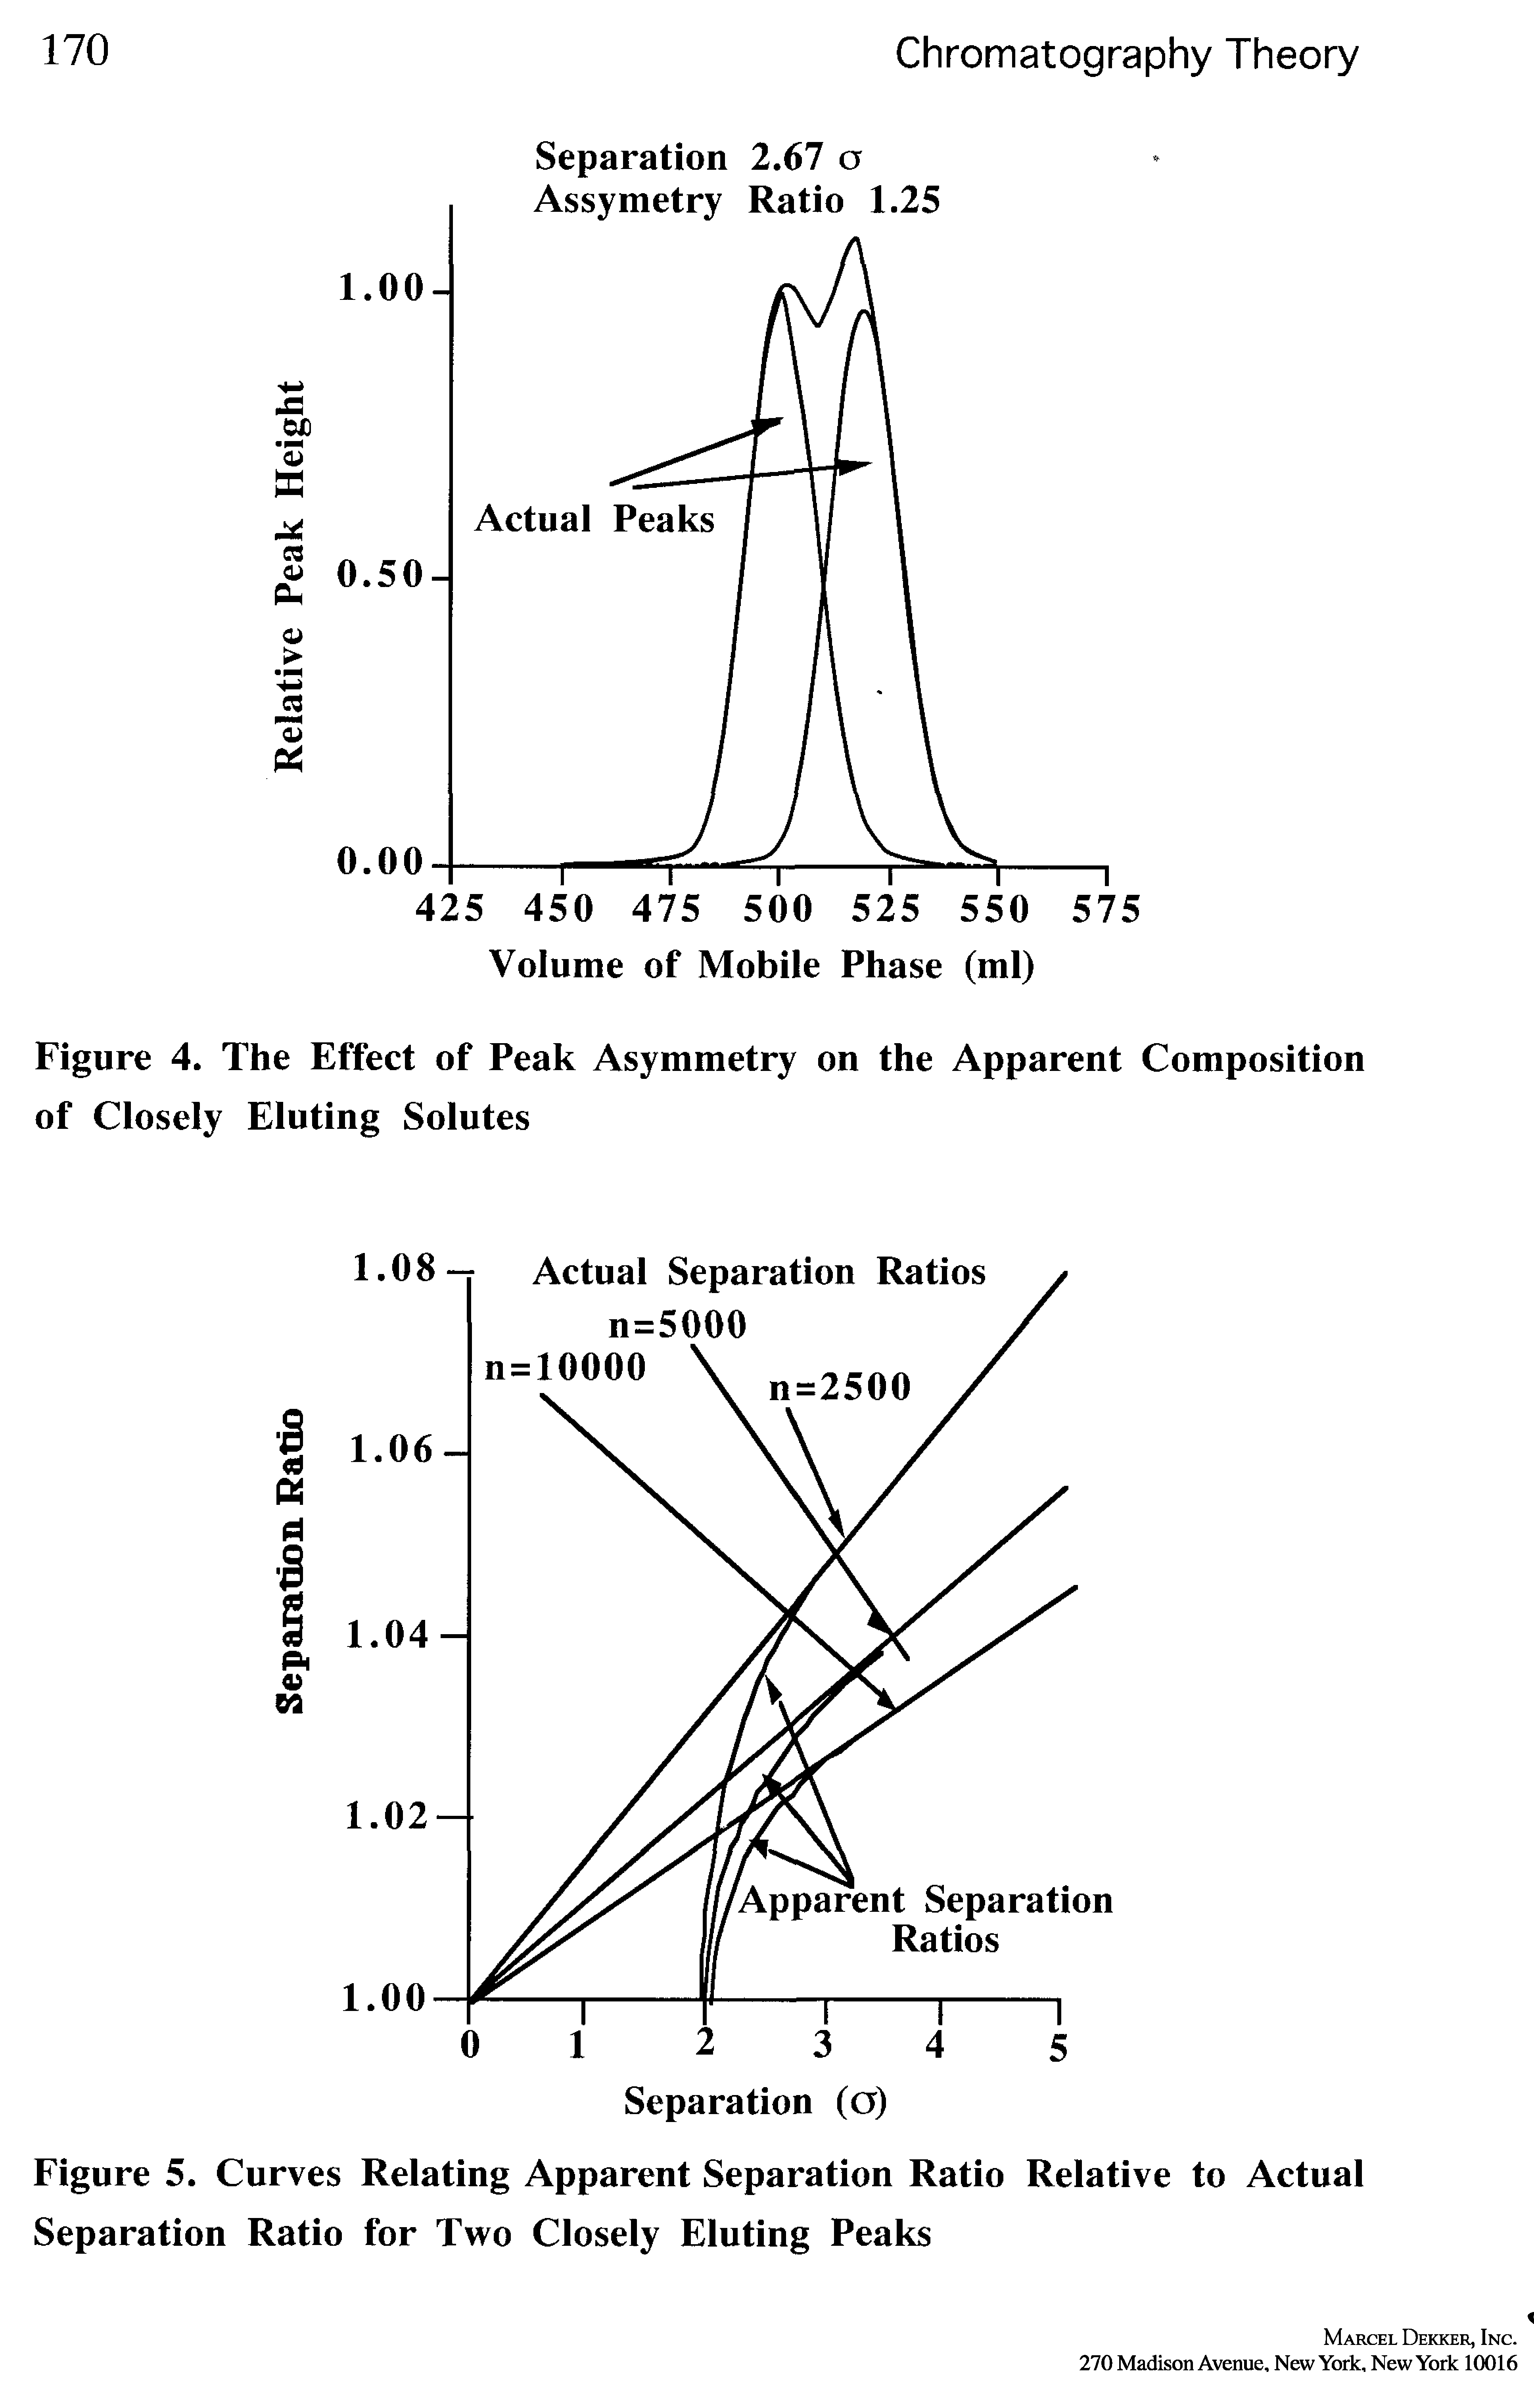 Figure 5. Curves Relating Apparent Separation Ratio Relative to Actual Separation Ratio for Two Closely Eluting Peaks...